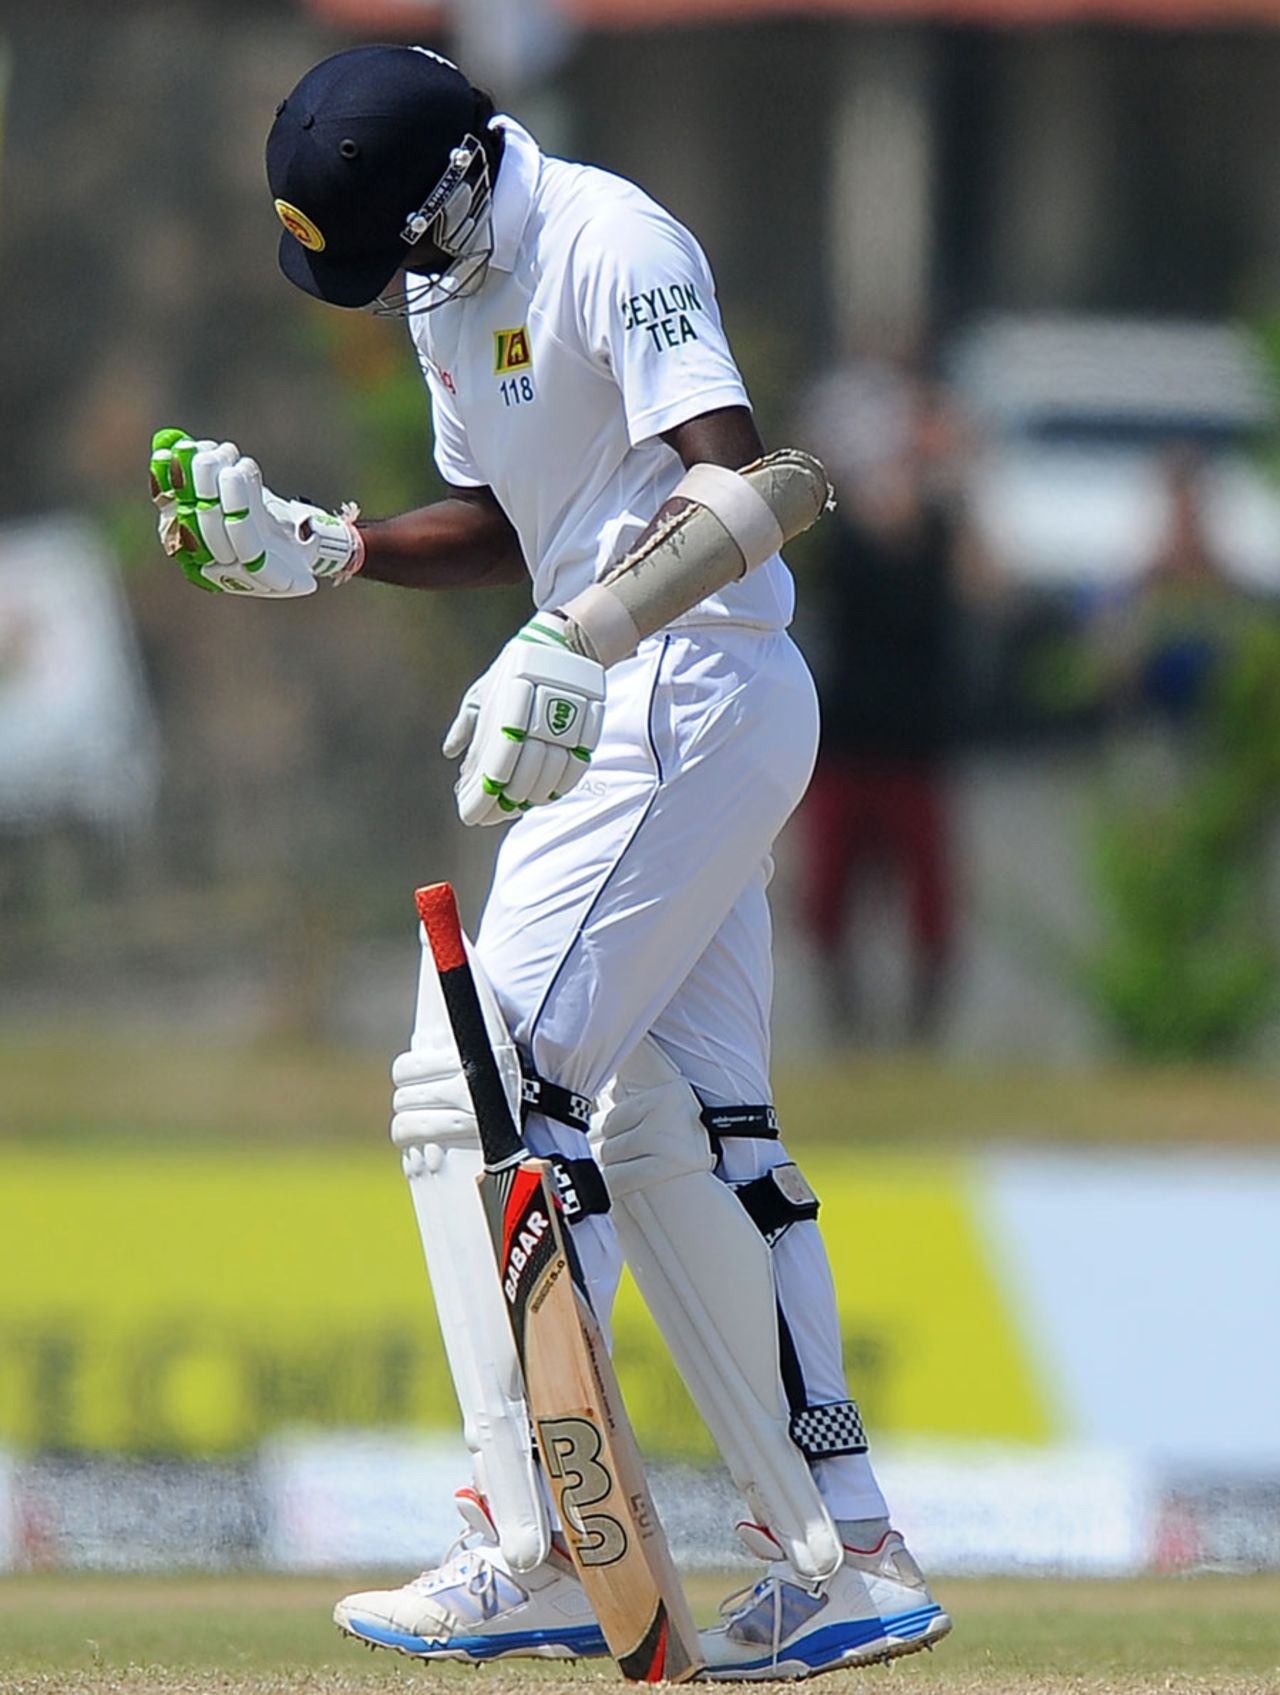 Shaminda Eranga checks his injured hand after a delivery from Dale Steyn, Sri Lanka v South Africa, 1st Test, Galle, 4th day, July 19, 2014